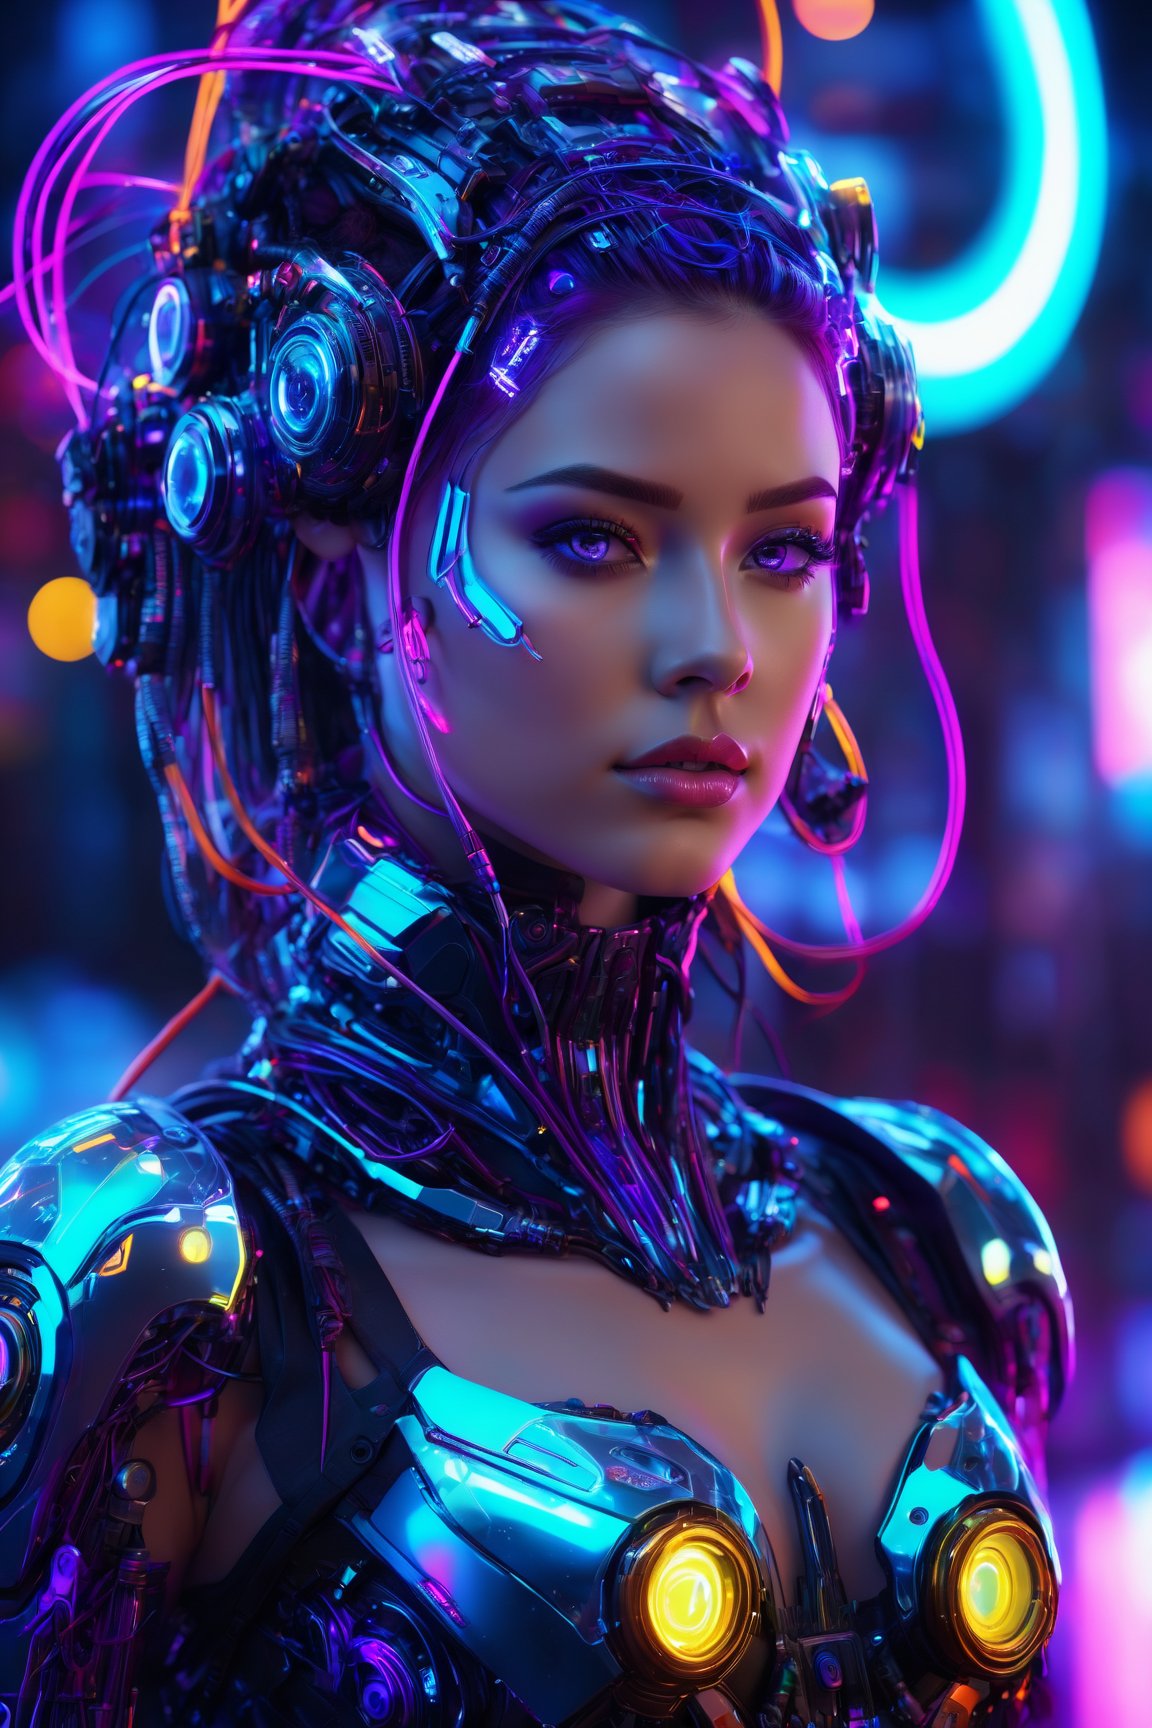 (best quality, 4k, 8k, highres, masterpiece:1.2), ultra-detailed, physically-based rendering, professional, vivid colors, bokeh, cyborg girl, made only glass, neon cables, gears, transparent body, mechanical details, glowing eyes, reflective surface, subtle reflections, ethereal, luminous, metallic highlights, sci-fi, futuristic, neon lights, blue and purple color palette, dynamic lighting,<lora:EMS-262287-EMS:0.800000>